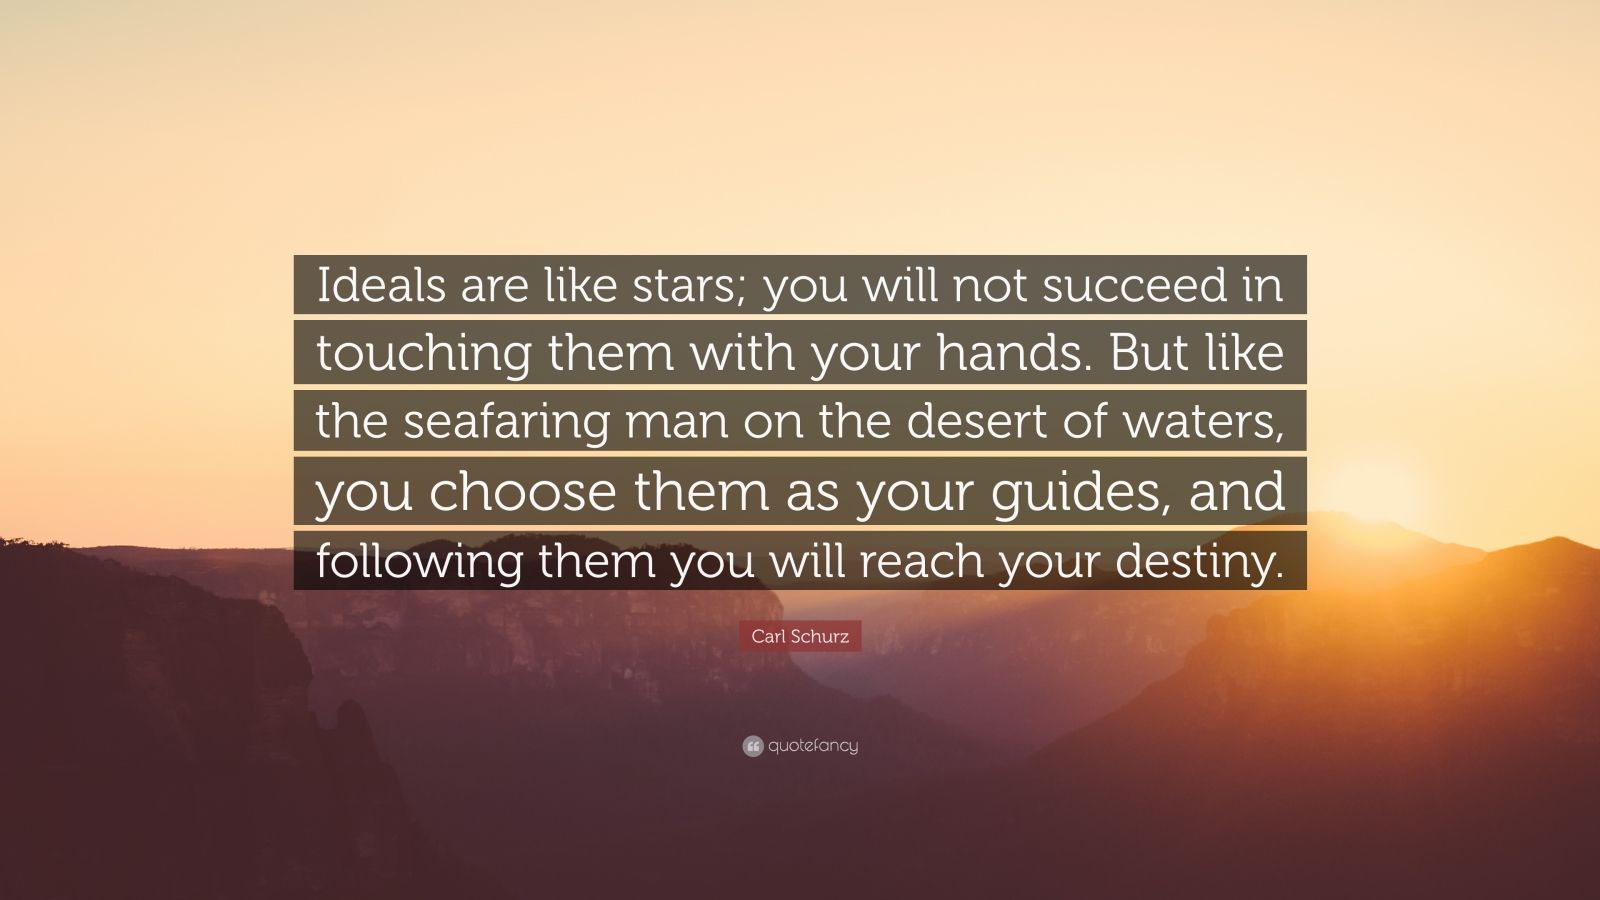 Carl Schurz Quote: "Ideals are like stars; you will not succeed in touching them with your hands ...